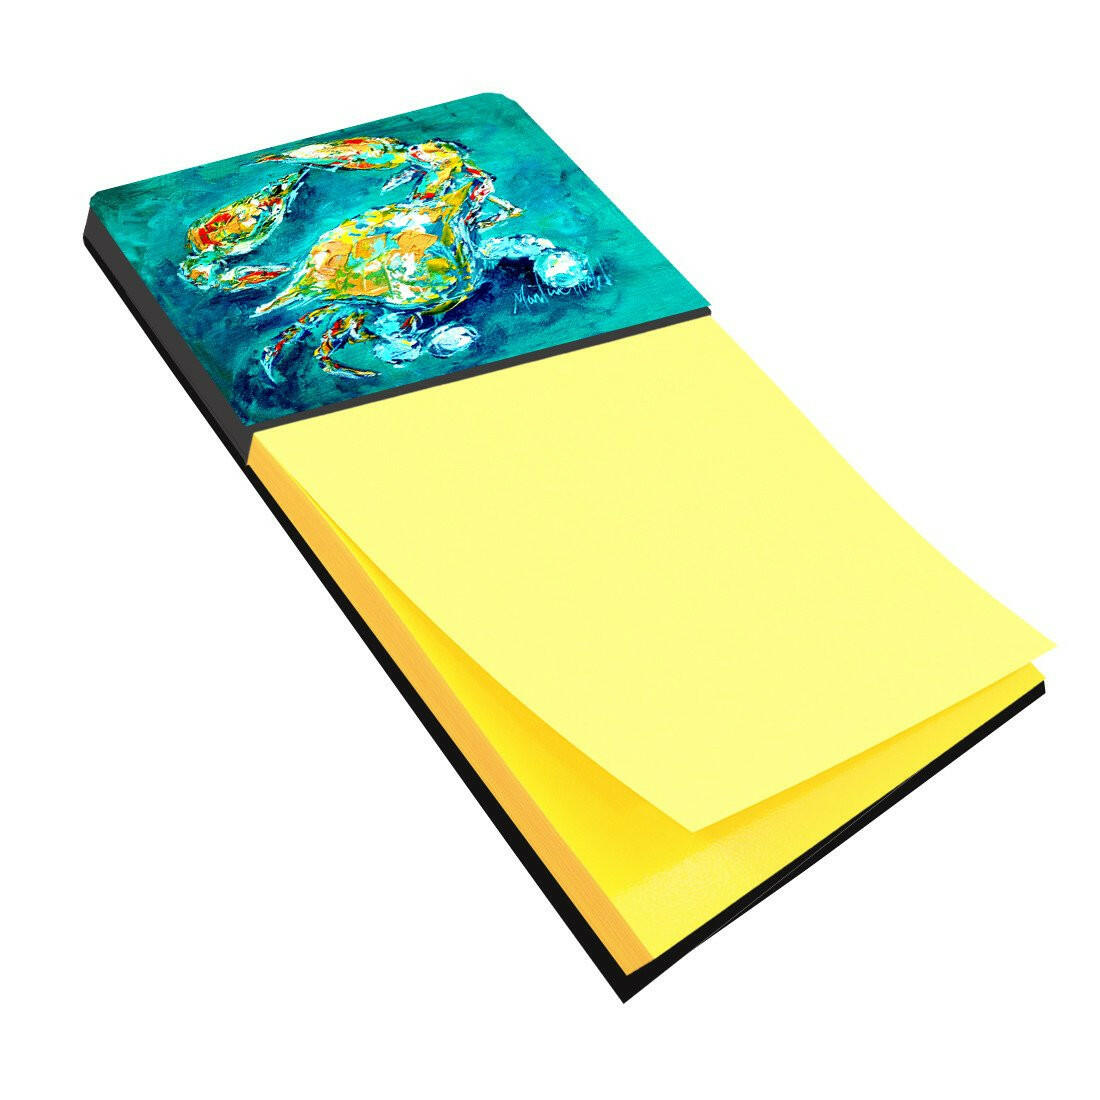 By Chance Crab in Aqua blue Refiillable Sticky Note Holder or Postit Note Dispenser MW1162SN by Caroline's Treasures